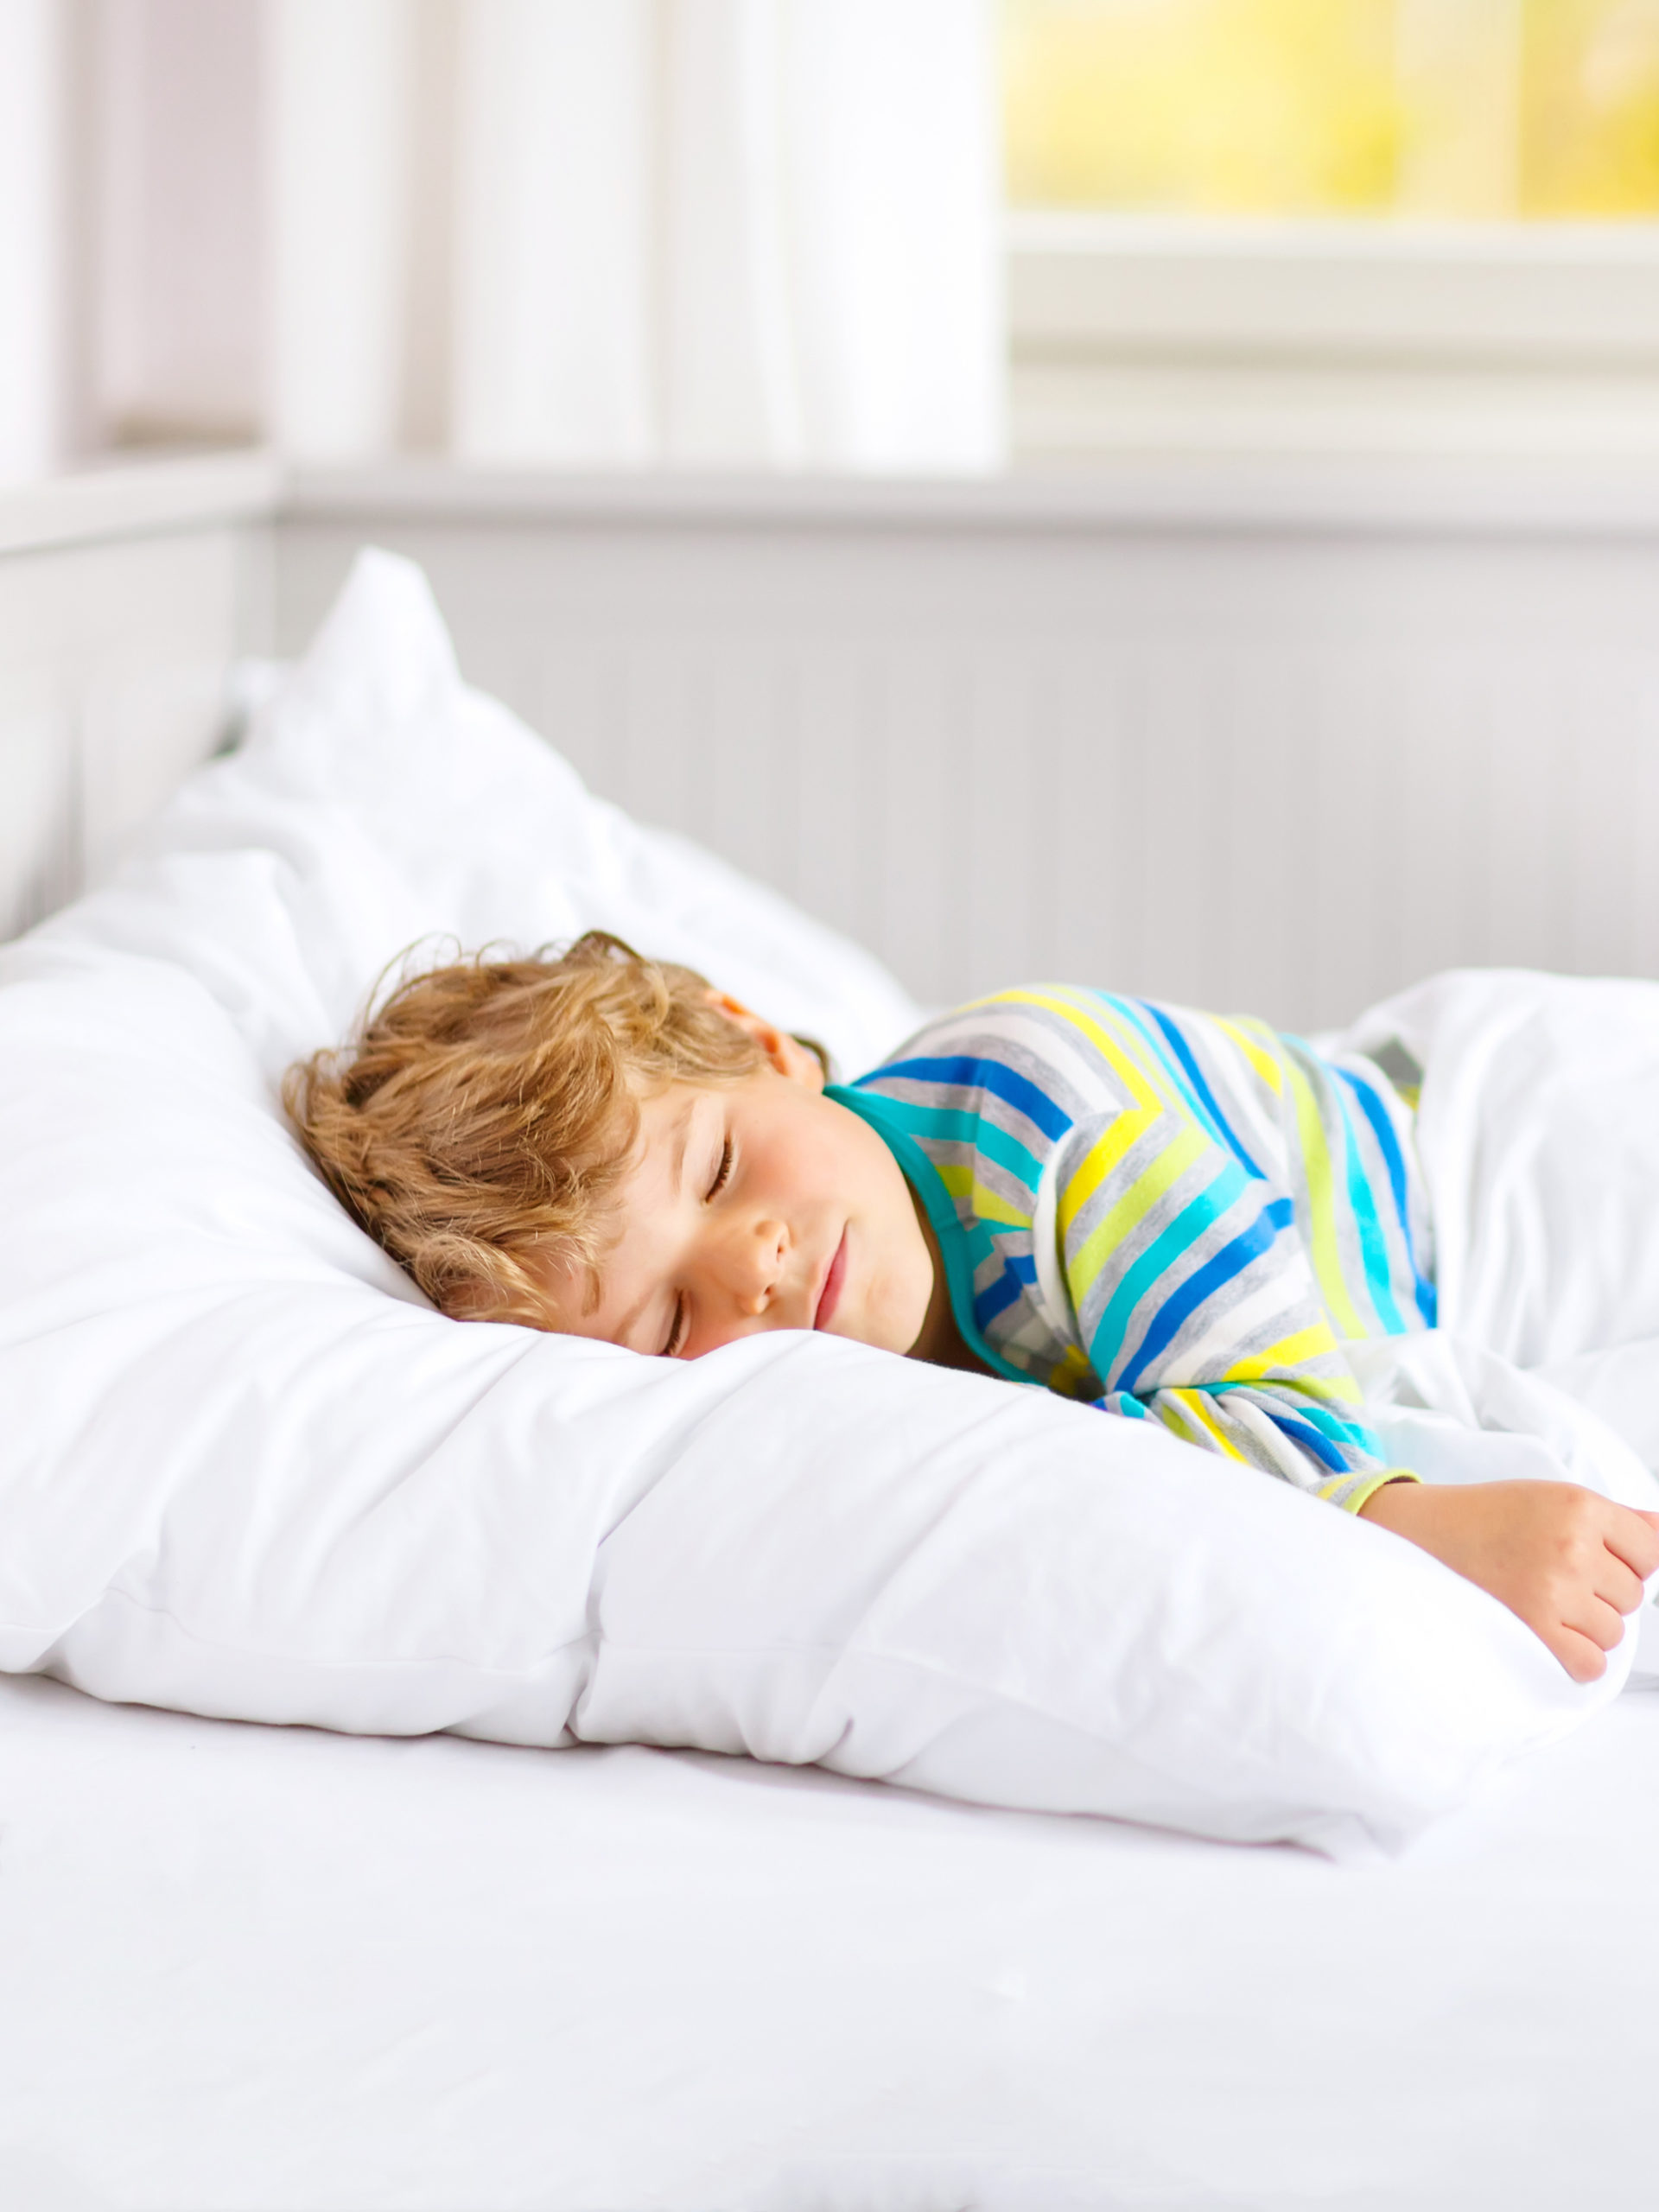 When should I move my toddler into a big bed?